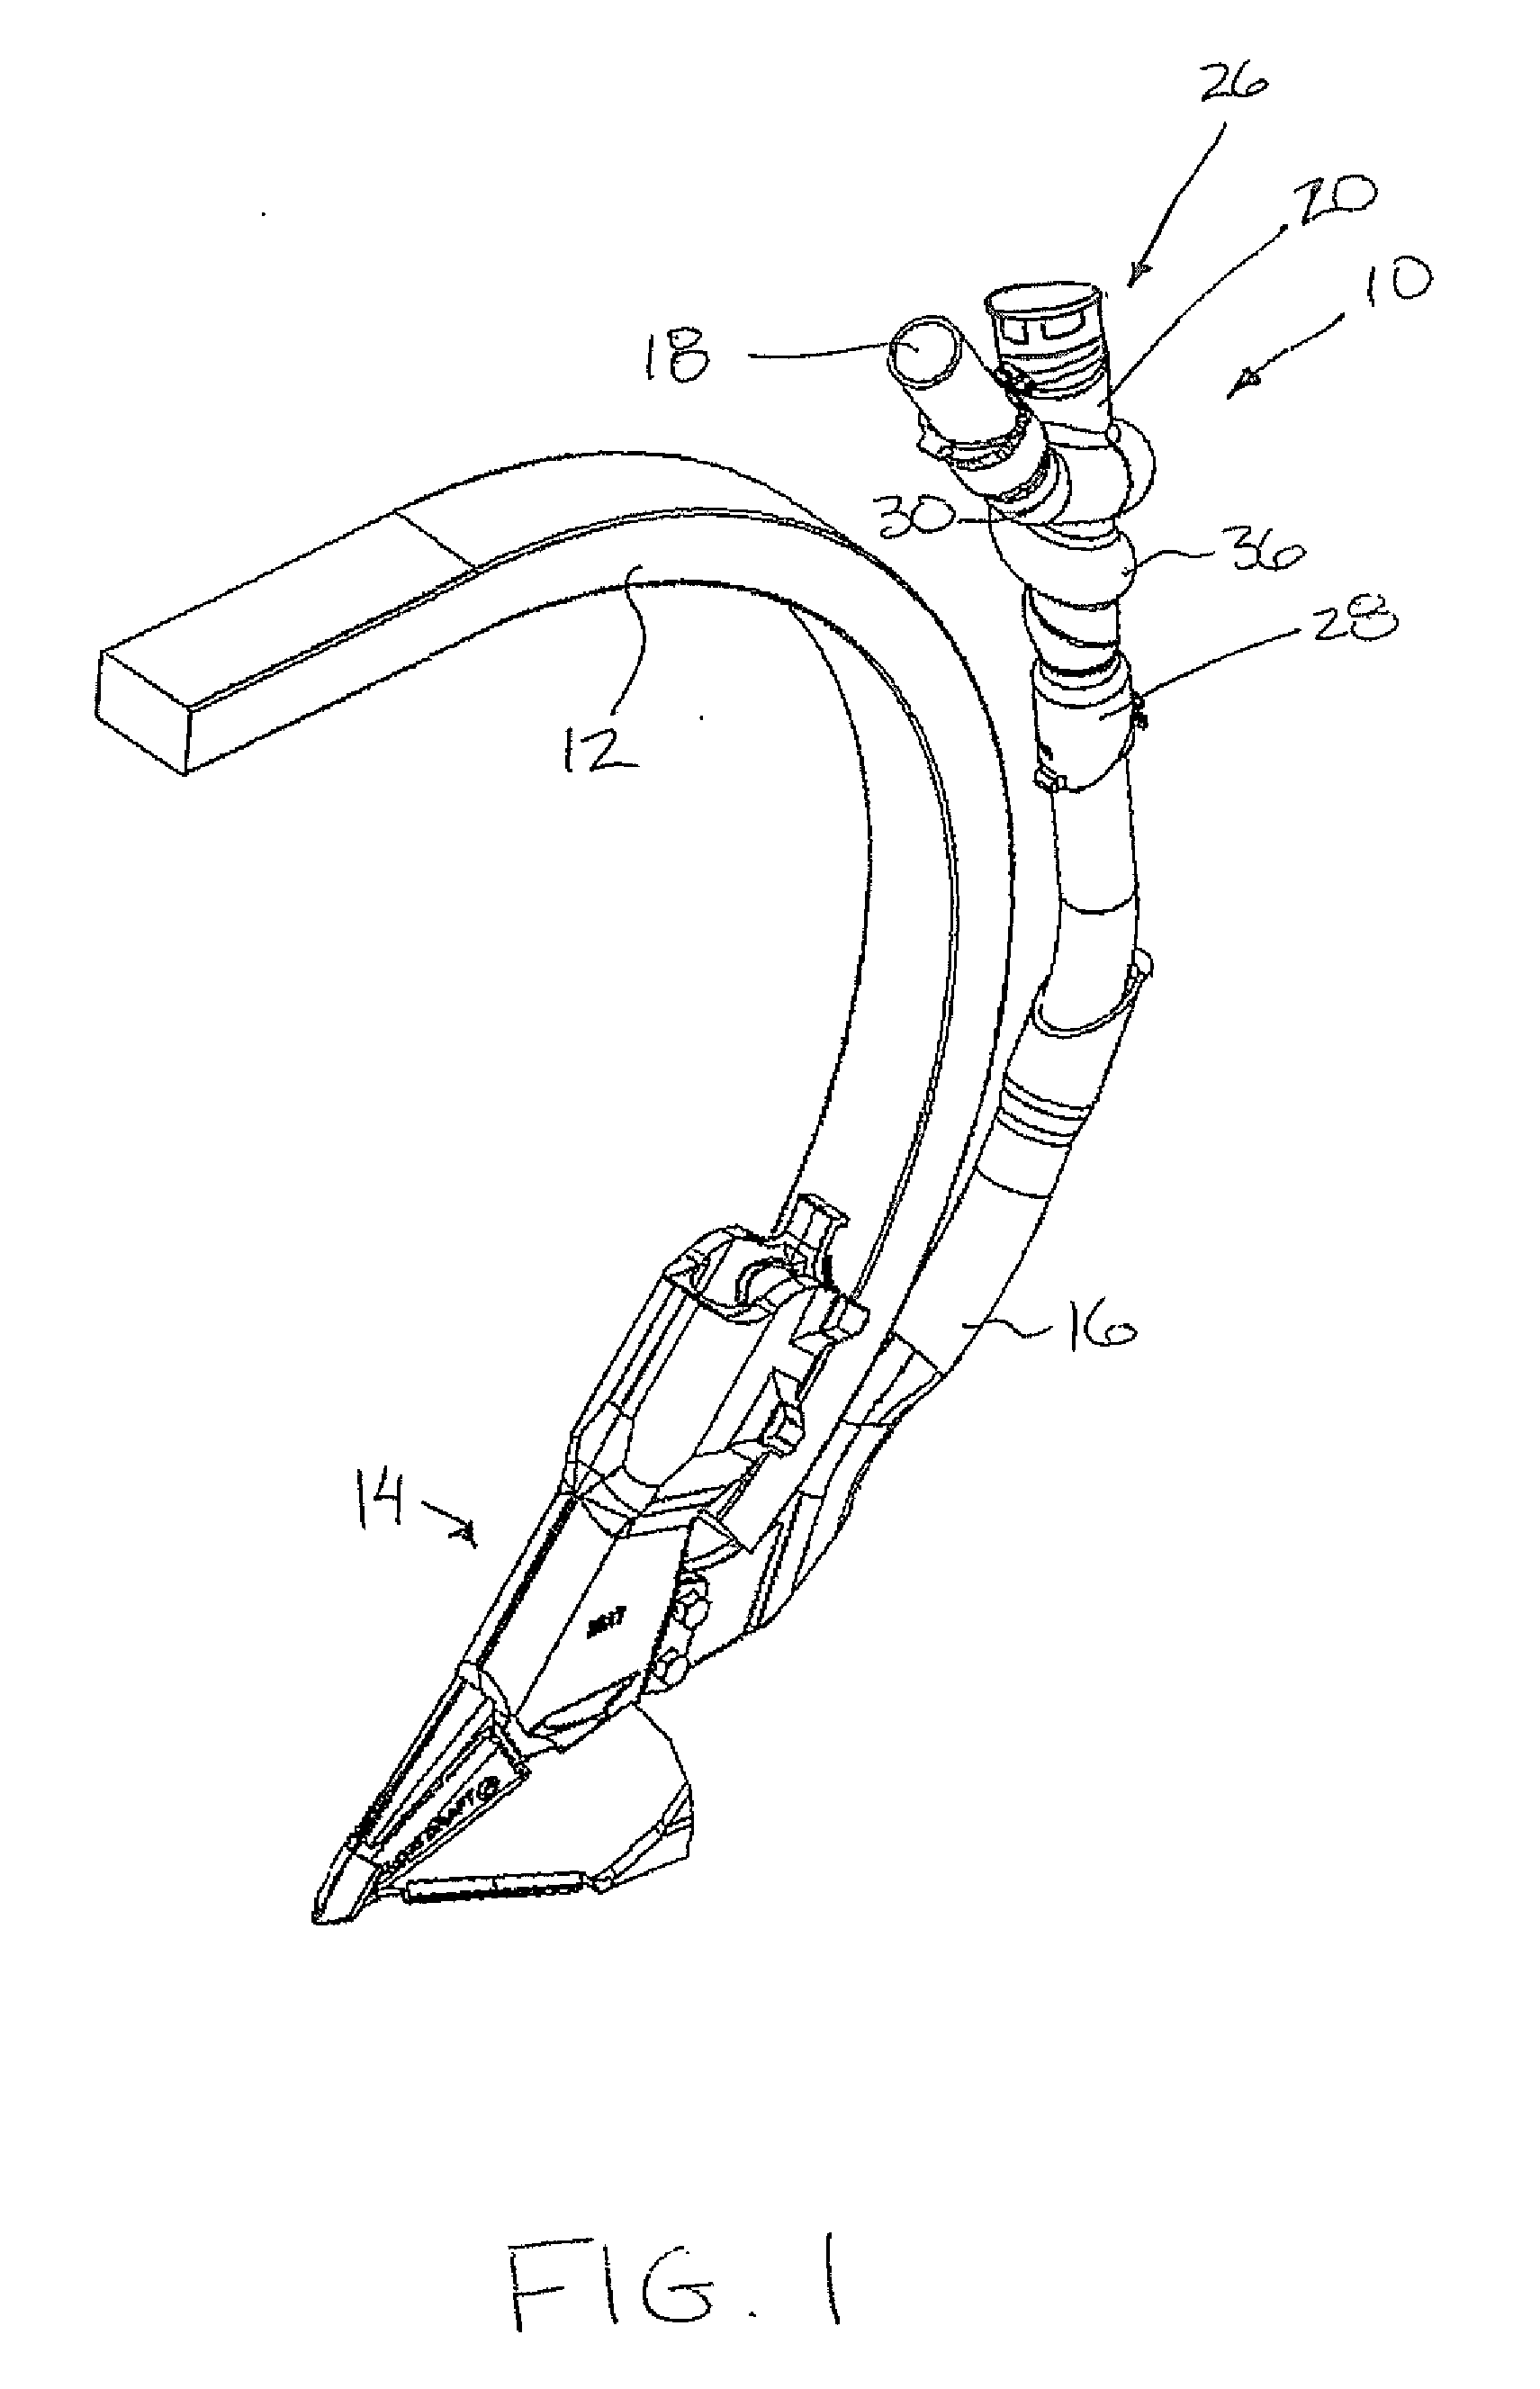 Decelerating Device for Air Conveyed Material